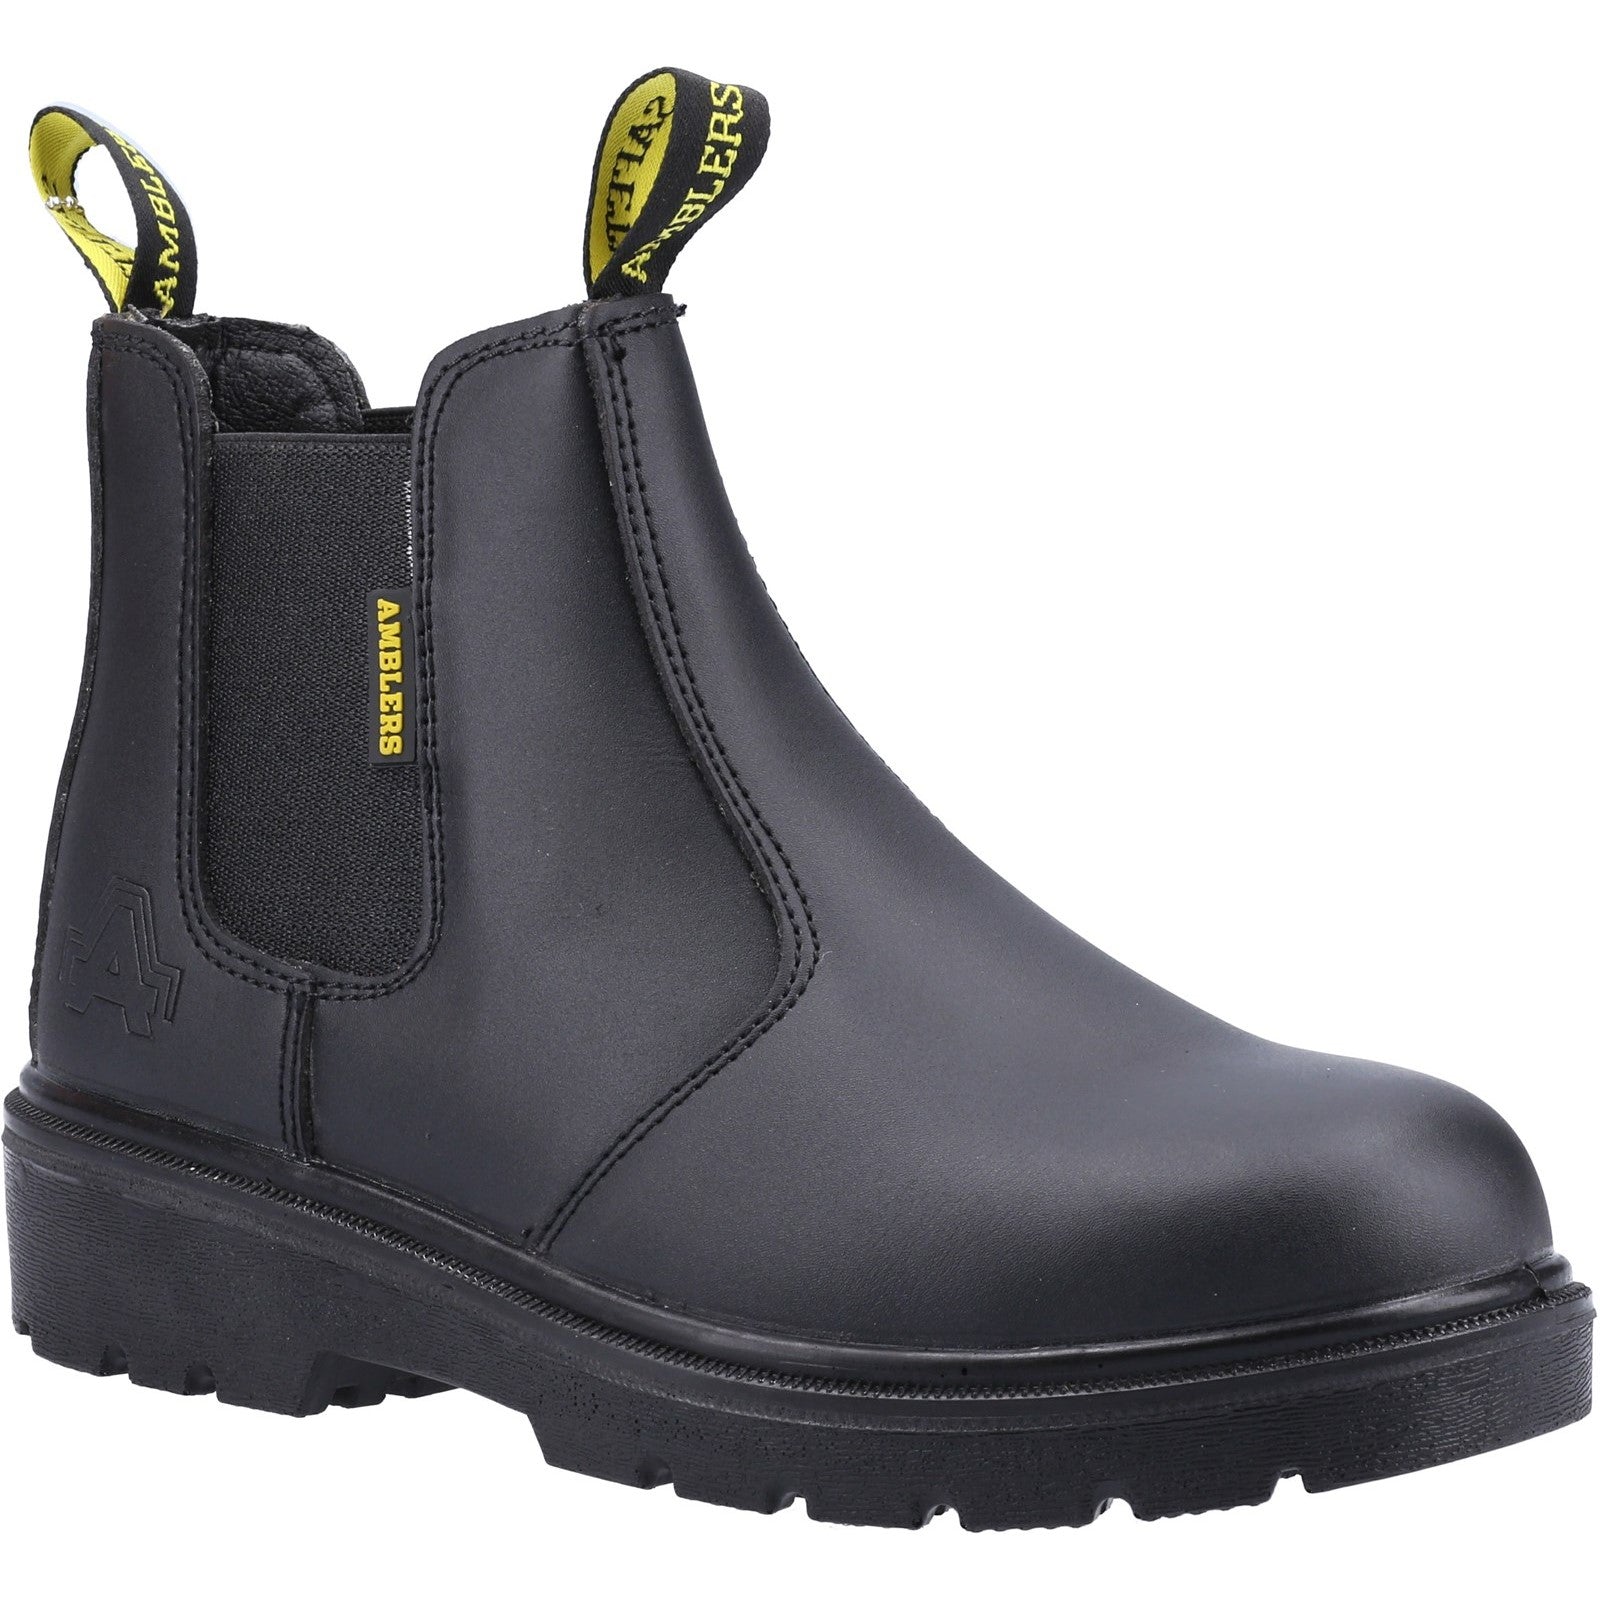 Amblers FS116 Dual Density Pull on Safety Dealer Boot